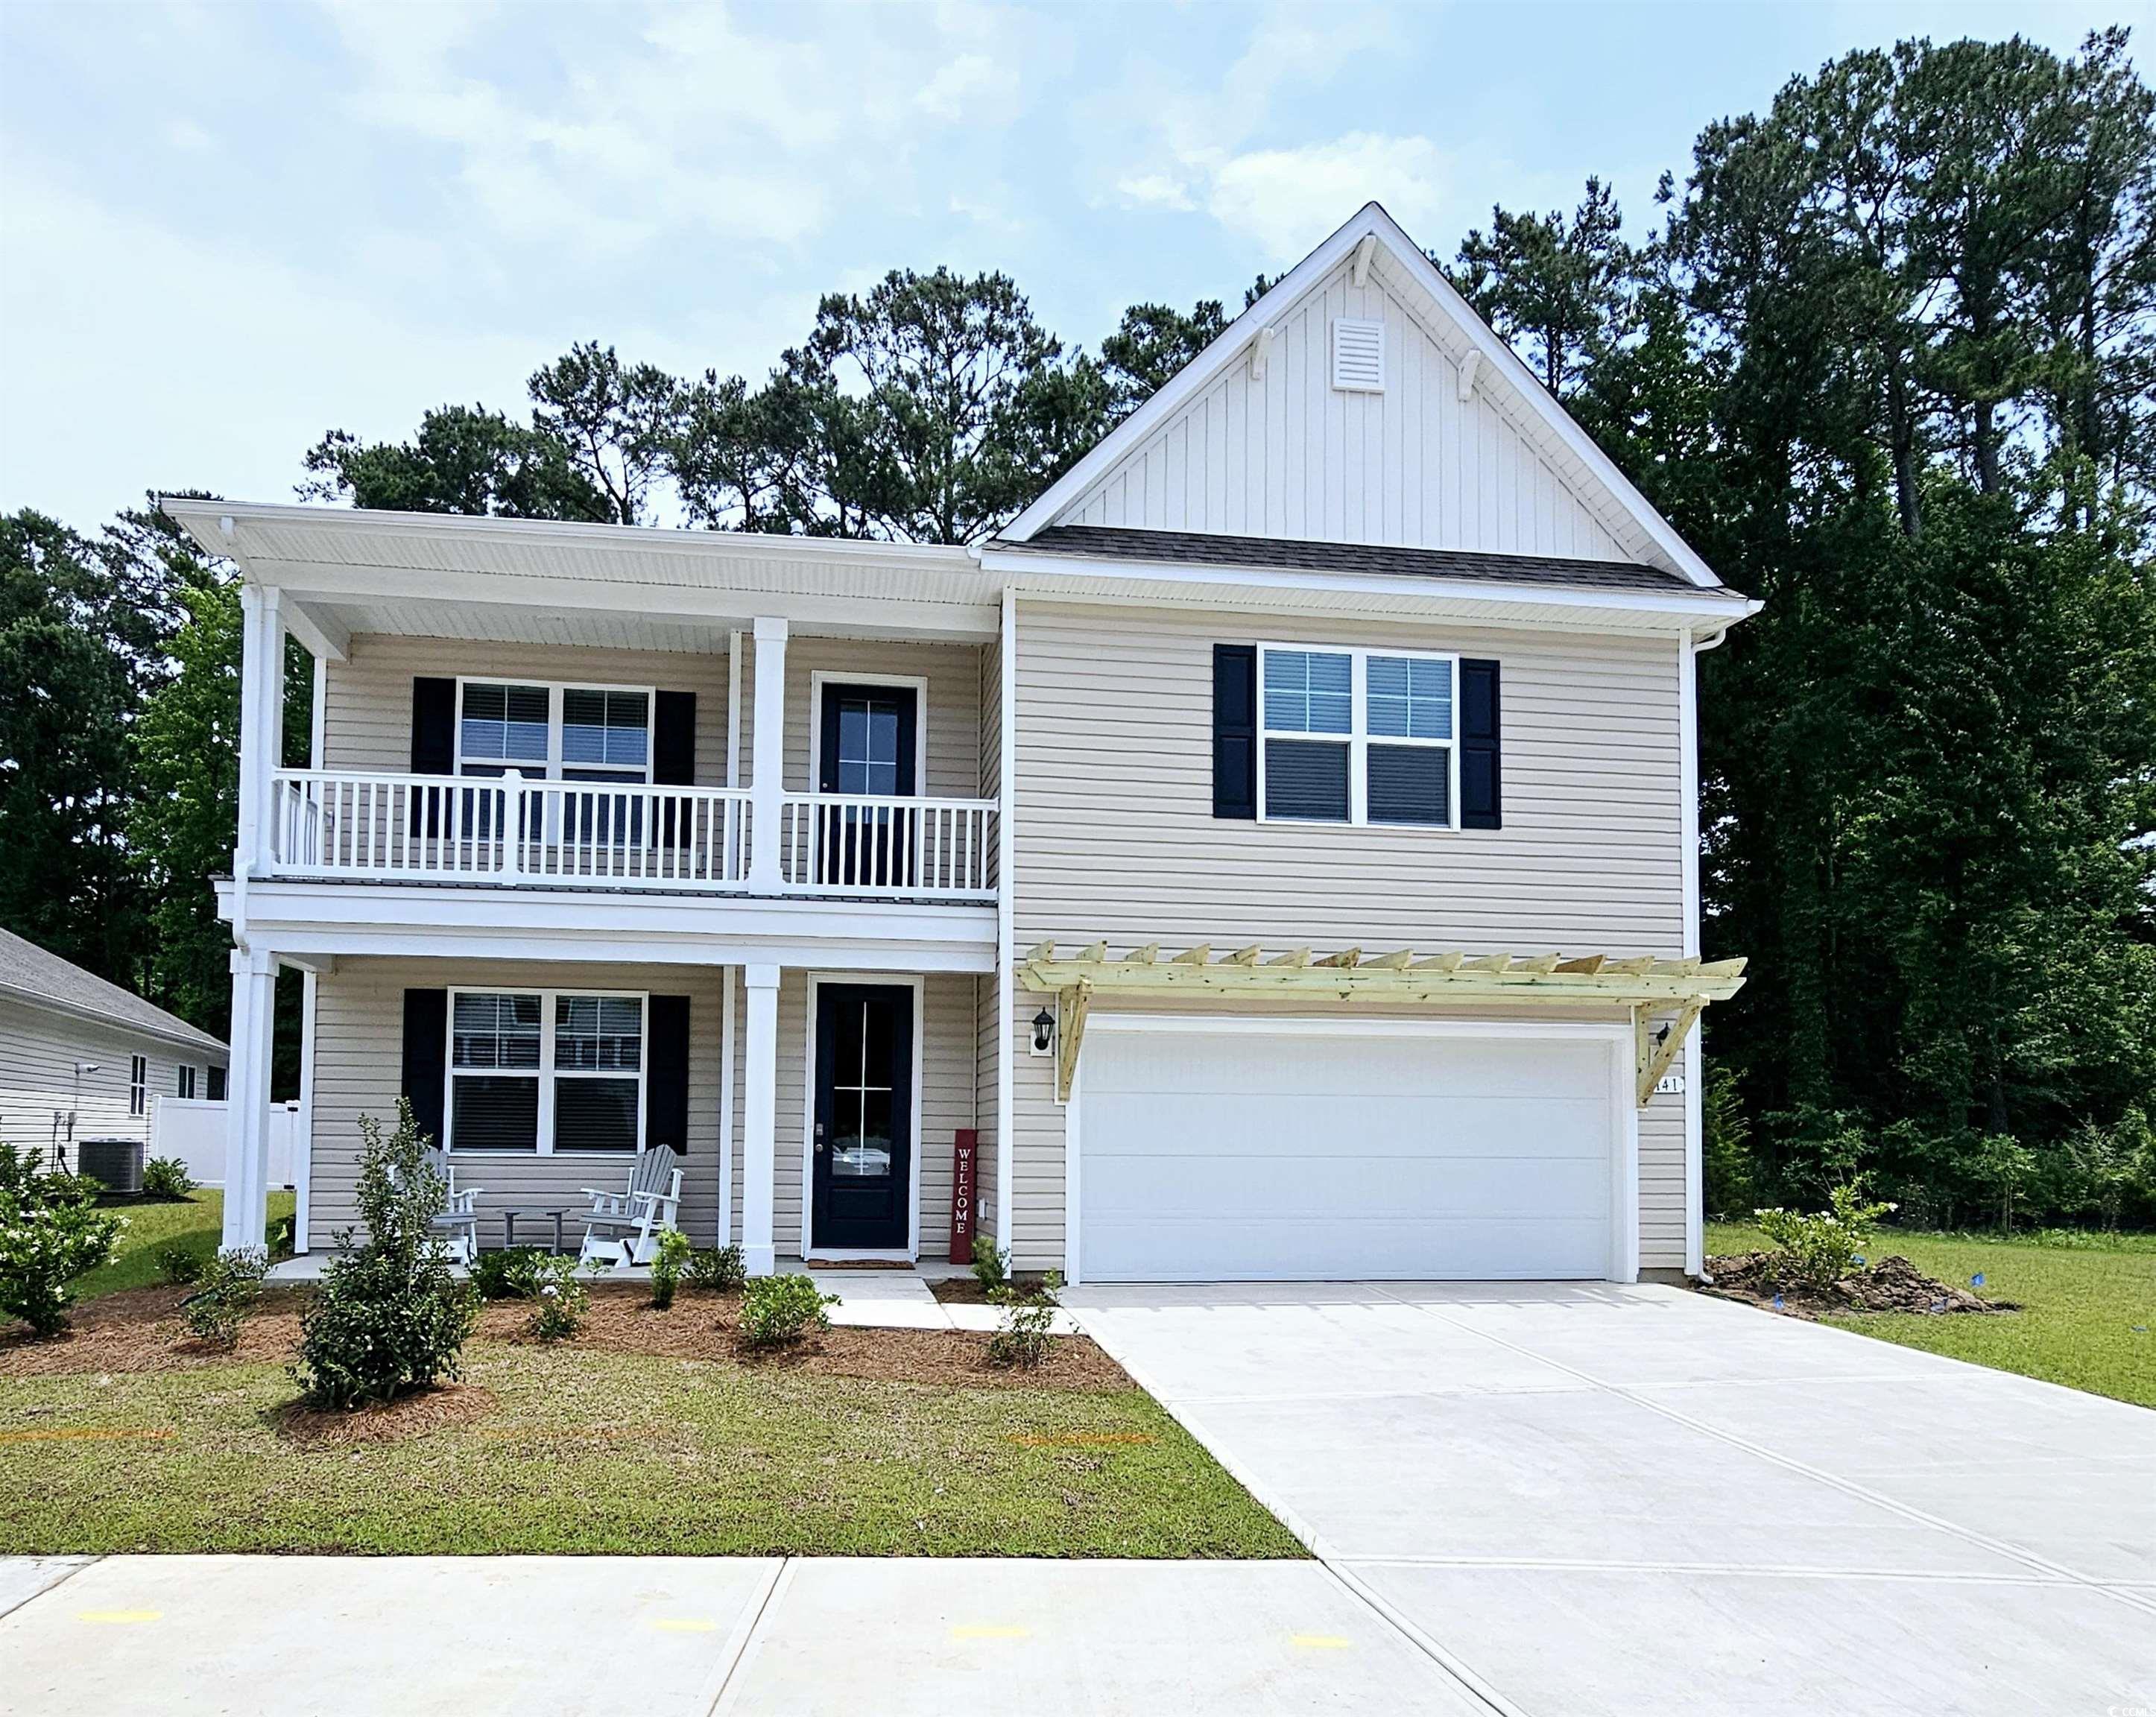 come see out newest community in the murrells inlet conveniently located to all the area has to offer!  the tillman is our very popular 2 story, open floor plan with a first floor owner's suite.  you will enjoy cooking in the huge kitchen with ample counter space and 36" cabinets, quartz counters, nice size pantry, and an oversized counter height working island that overlooks the living room which is perfect for entertaining. very spacious 15 x 20 ft. owner's suite with a massive walk-in closet. owners bath has double vanity and a 5 ft. walk-in shower. off the entry foyer stairs lead up to an amazing bonus room/loft that measures nearly 20' x 20'!  4 large additional bedrooms, laundry room and 2 full baths finish off the upstairs.  must see!!    this is america's smart home! each of our homes comes with an industry leading smart home technology package that will allow you to control the thermostat, front door light and lock, and video doorbell from your smartphone or with voice commands to alexa. *photos are of a similar tillman home.  (home and community information, including pricing, included features, terms, availability and amenities, are subject to change prior to sale at any time without notice or obligation. square footages are approximate. pictures, photographs, colors, features, and sizes are for illustration purposes only and will vary from the homes as built. equal housing opportunity builder.)